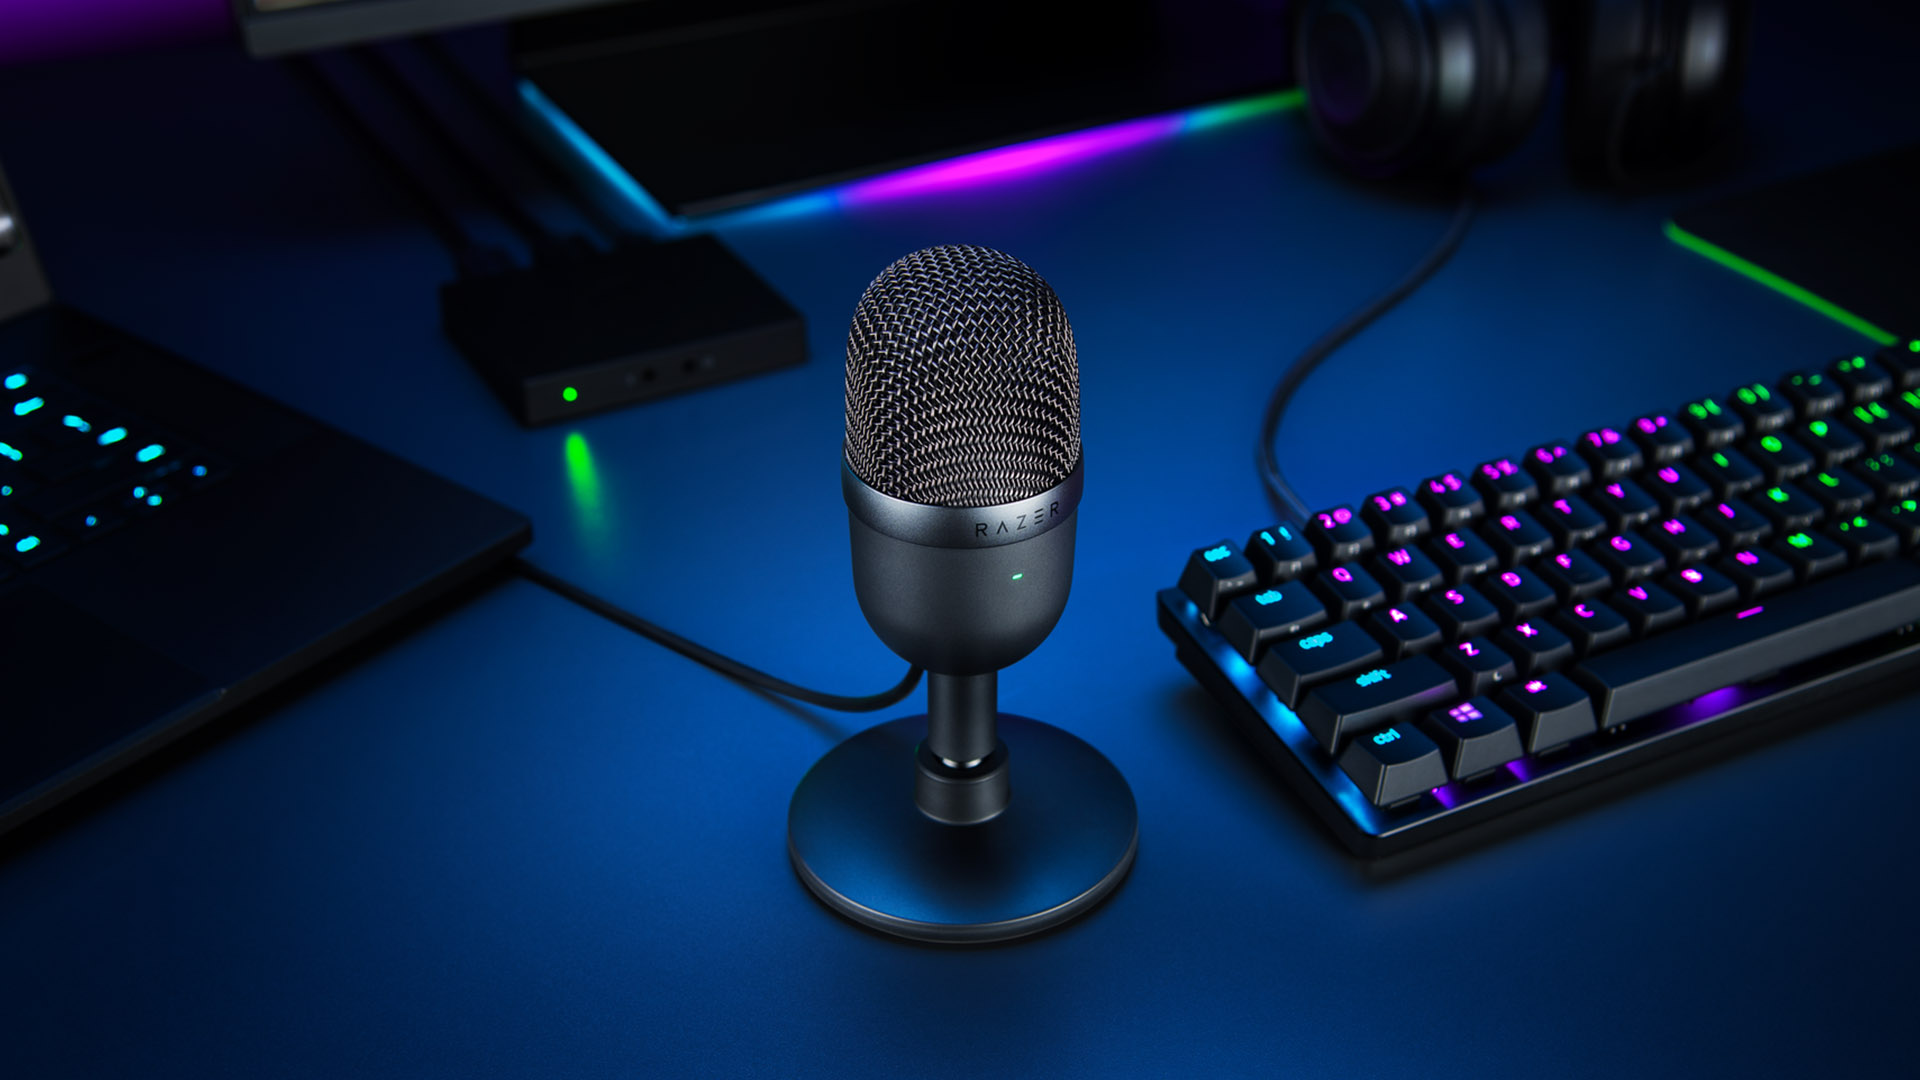 Best gaming microphone: the Razer Seiren Mini, pictured on a desk beside a keyboard.